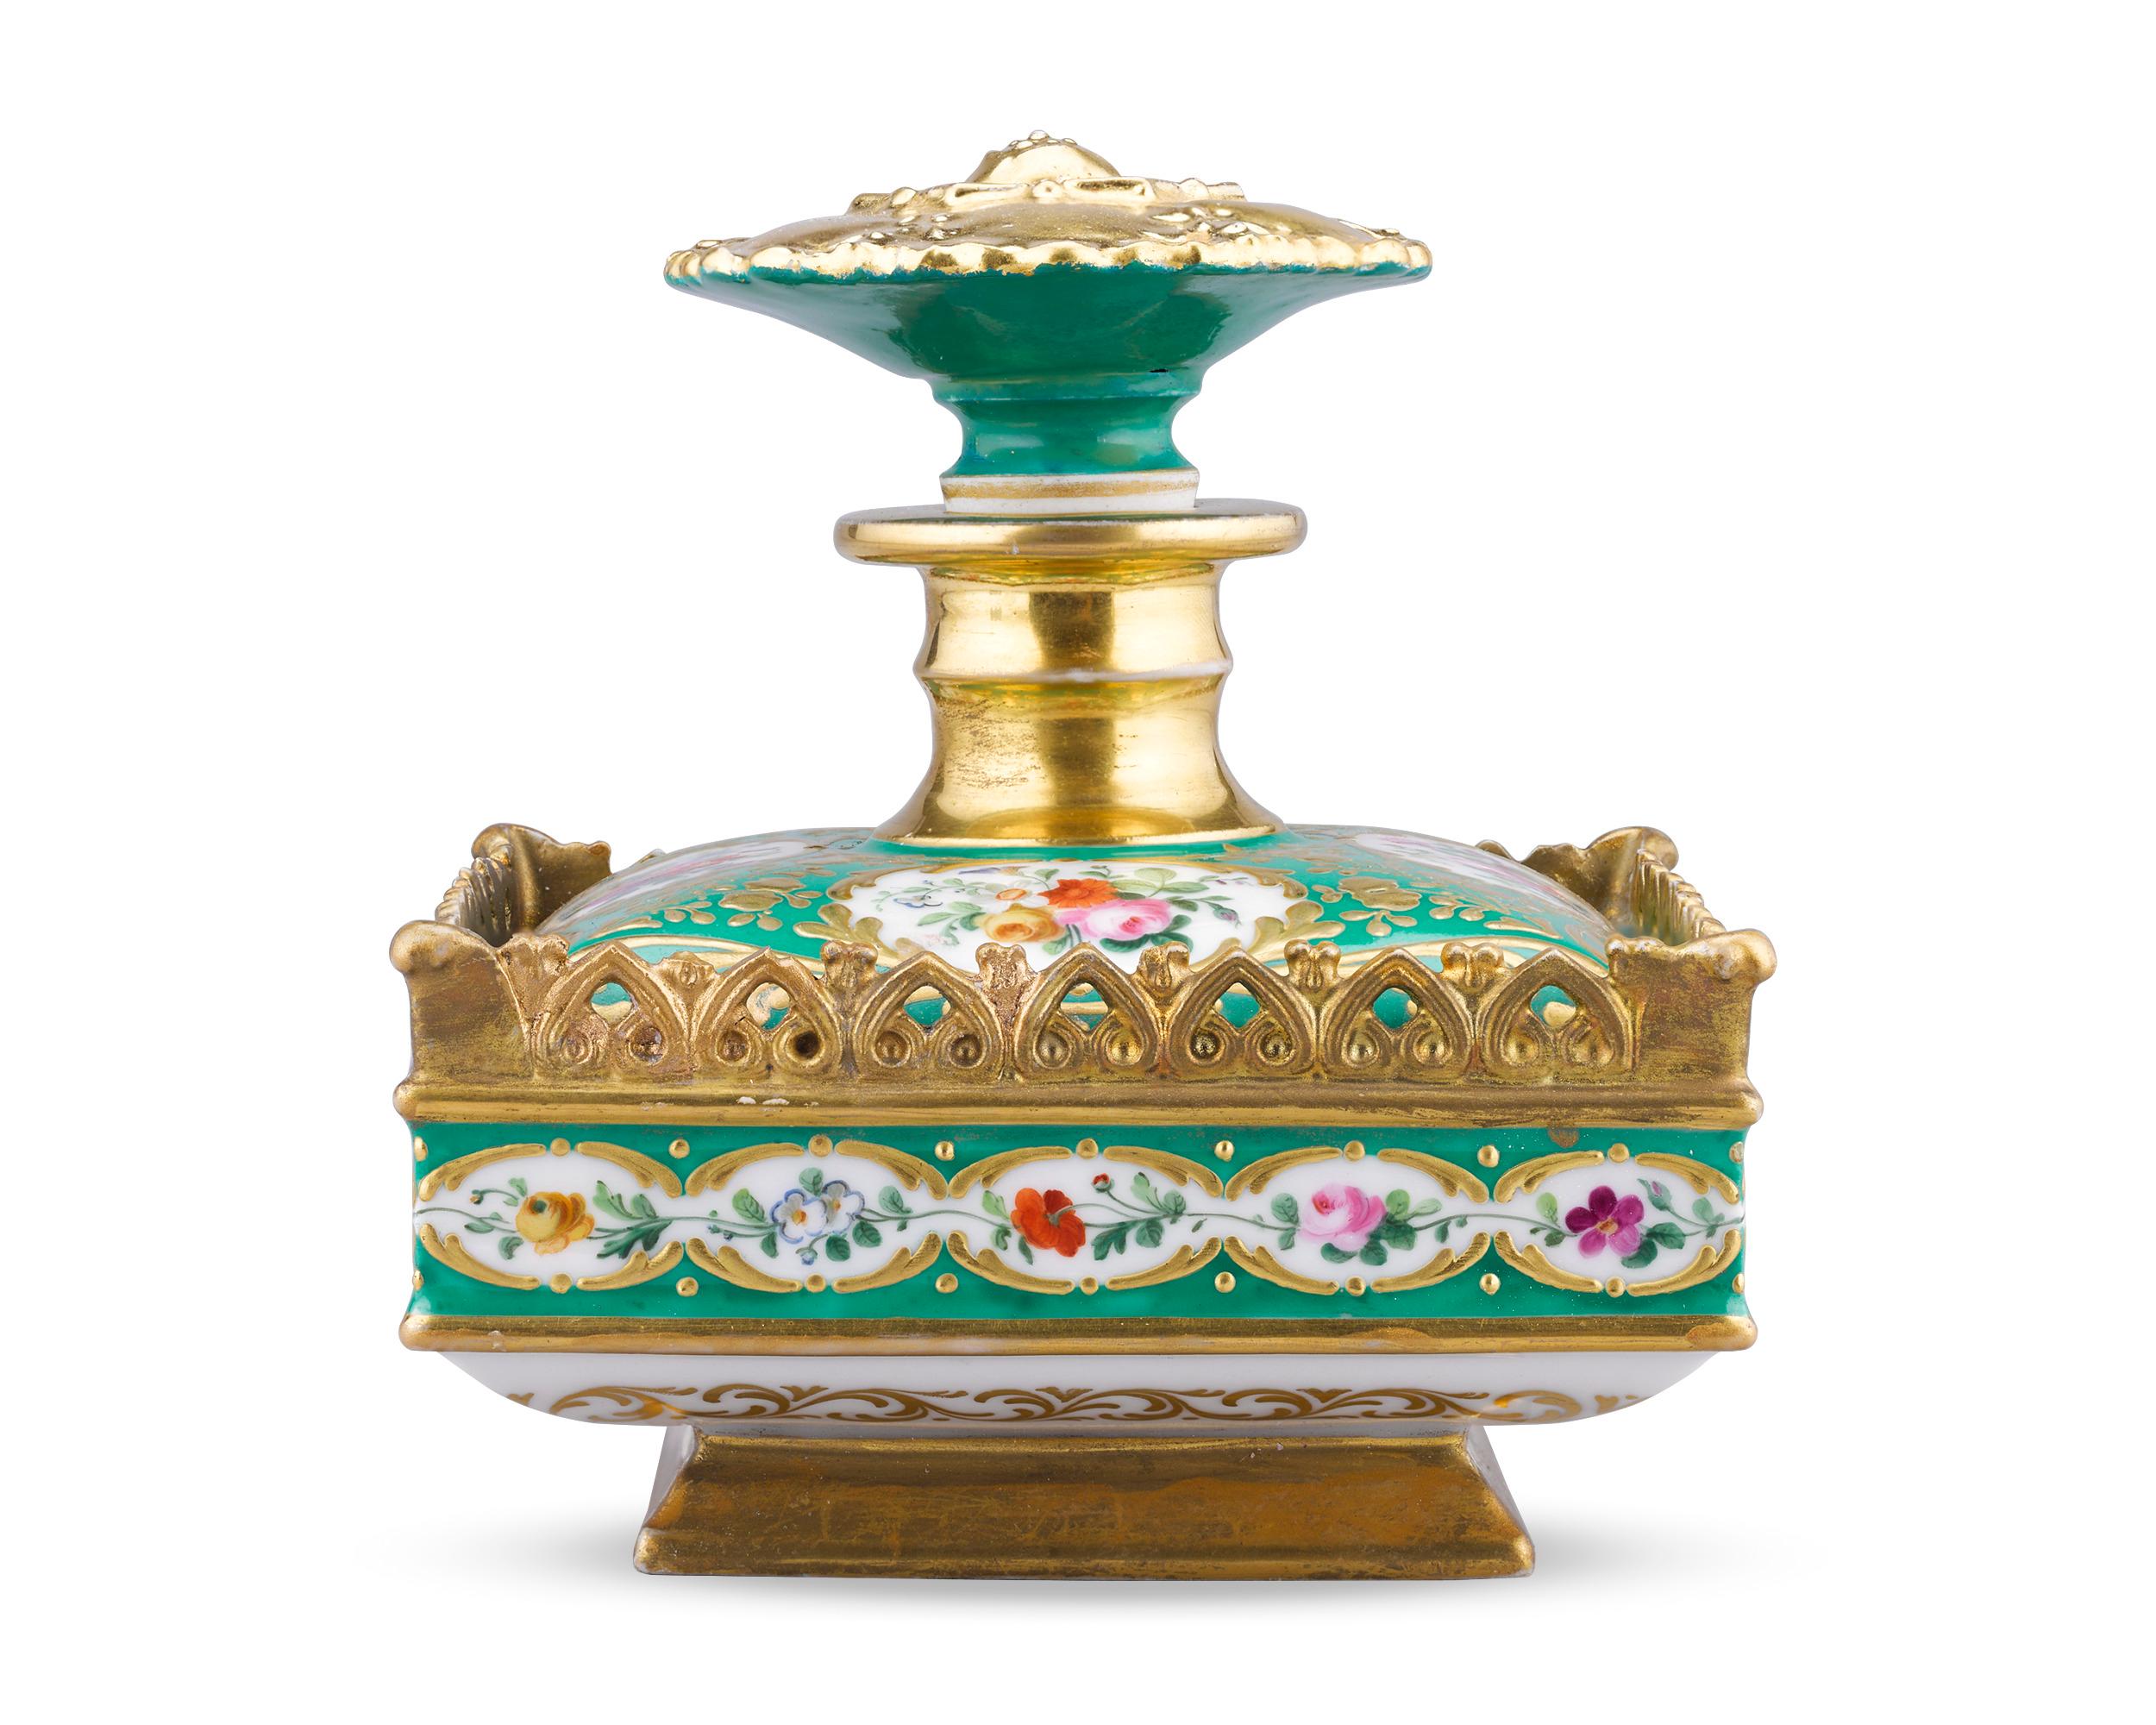 Diminutive yet ornate, this porcelain perfume was created by Jacob Petit, one of the most important and well-known makers of French porcelain. Its green ground is lavishly decorated with hand-painted flowers and gilt accents, demonstrating Petit's